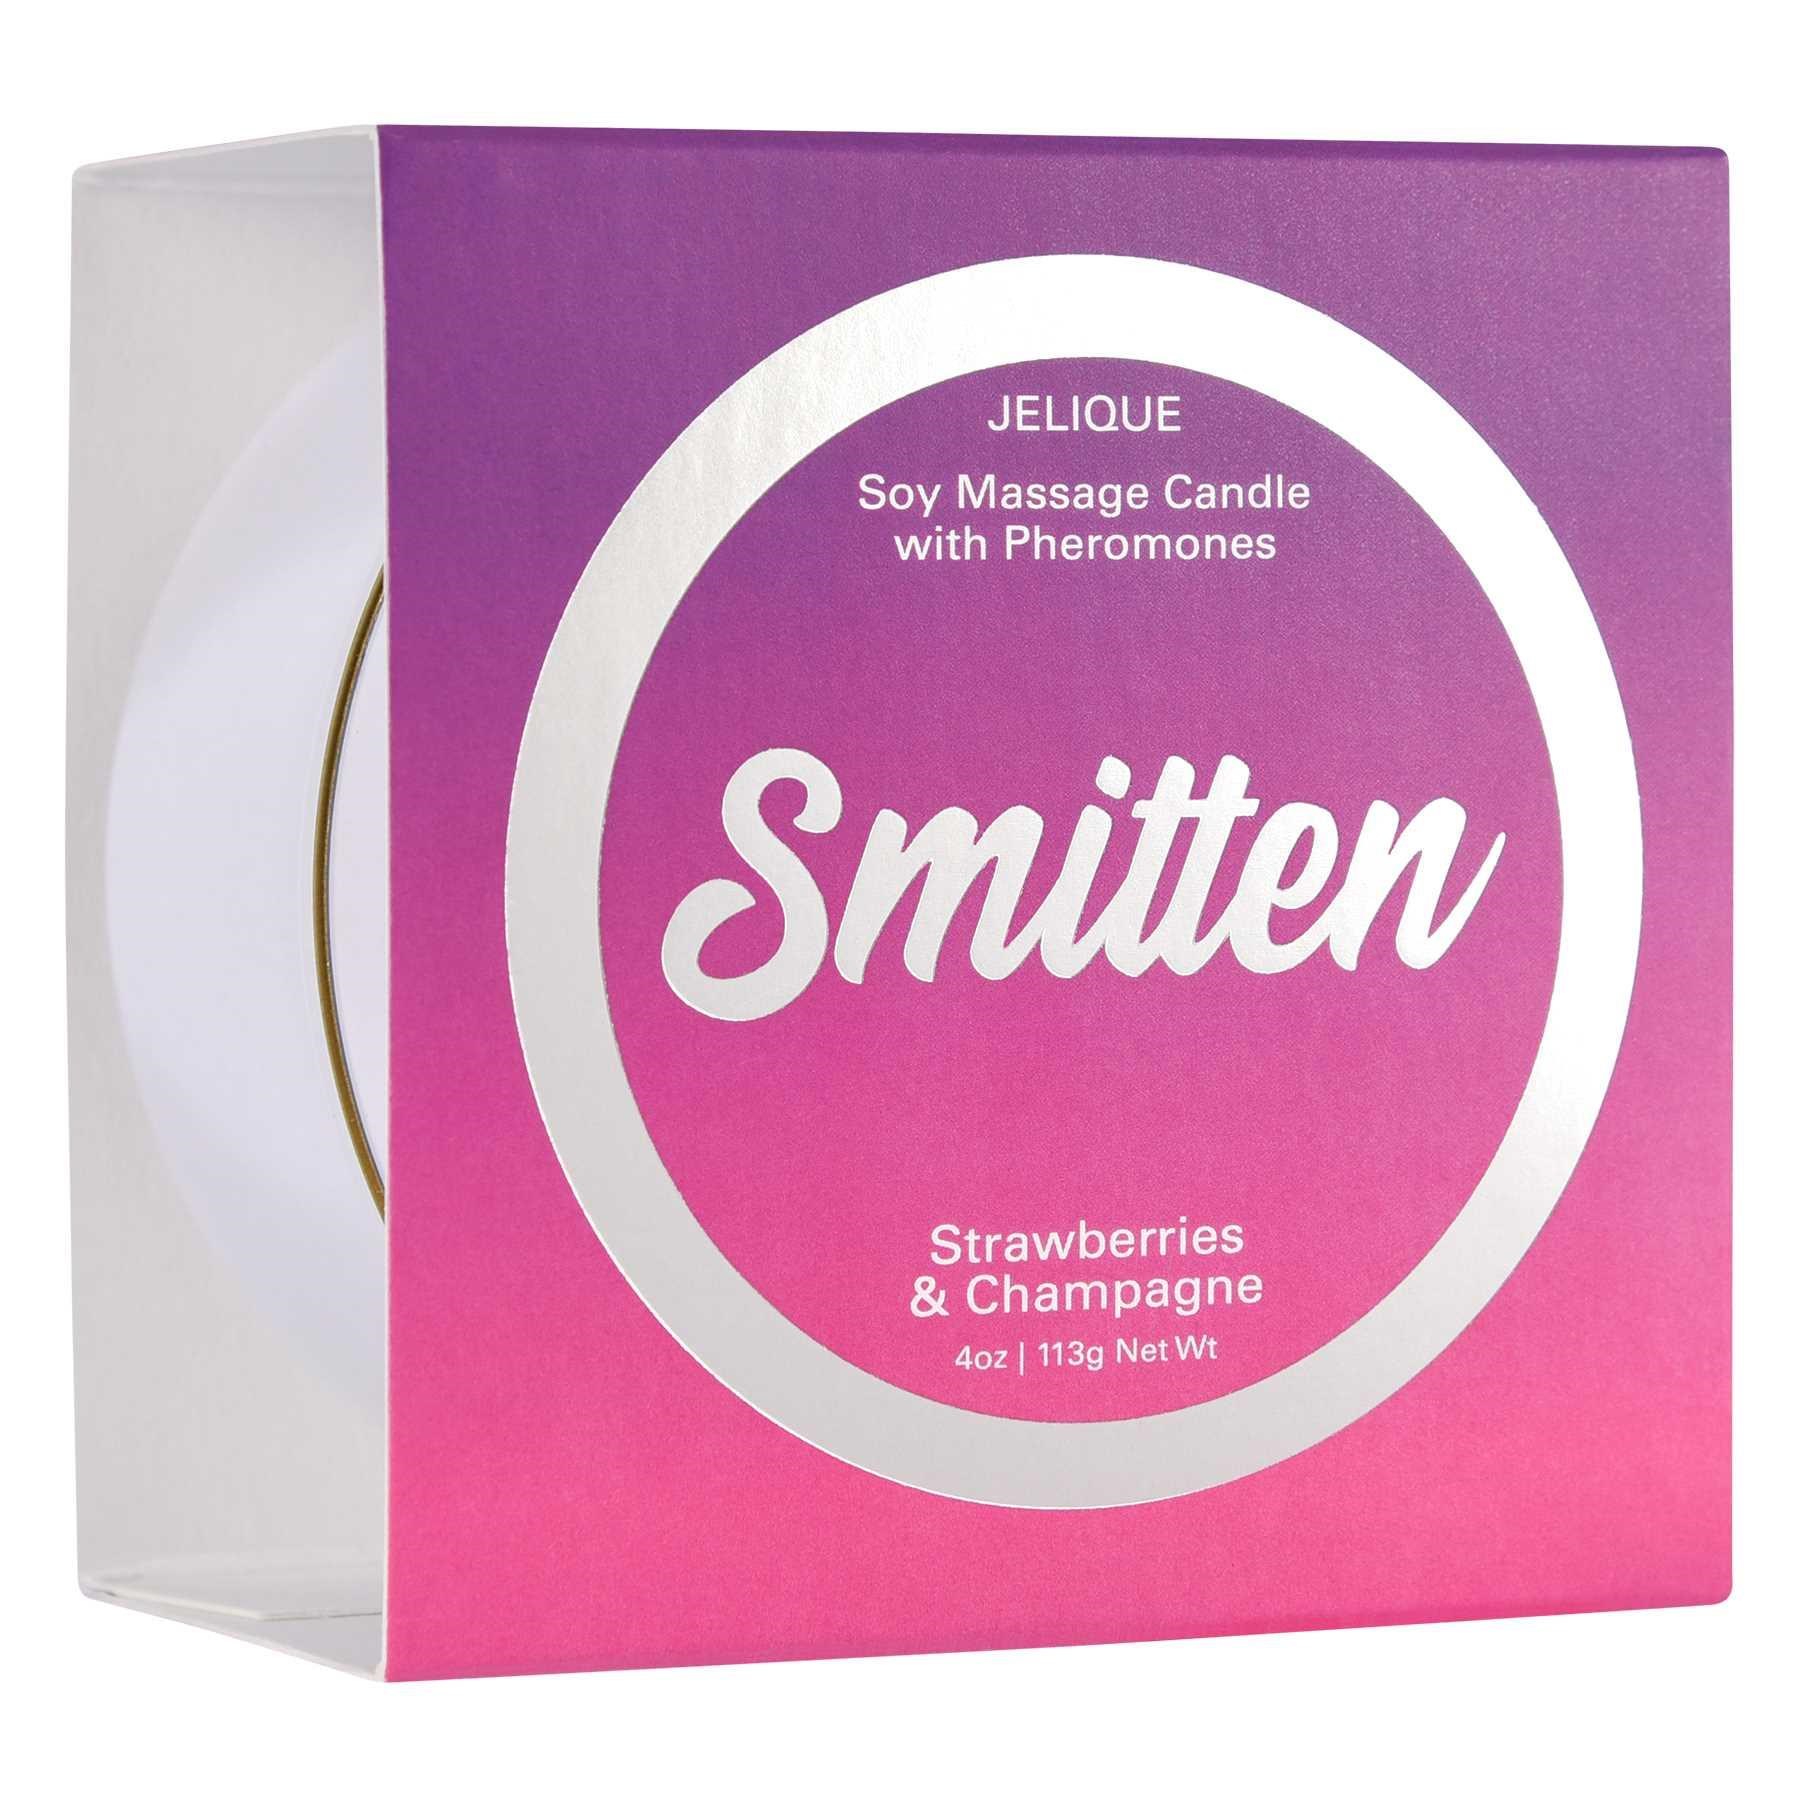 MASSAGE CANDLE WITH PHEROMONES -SMITTEN side of packaging